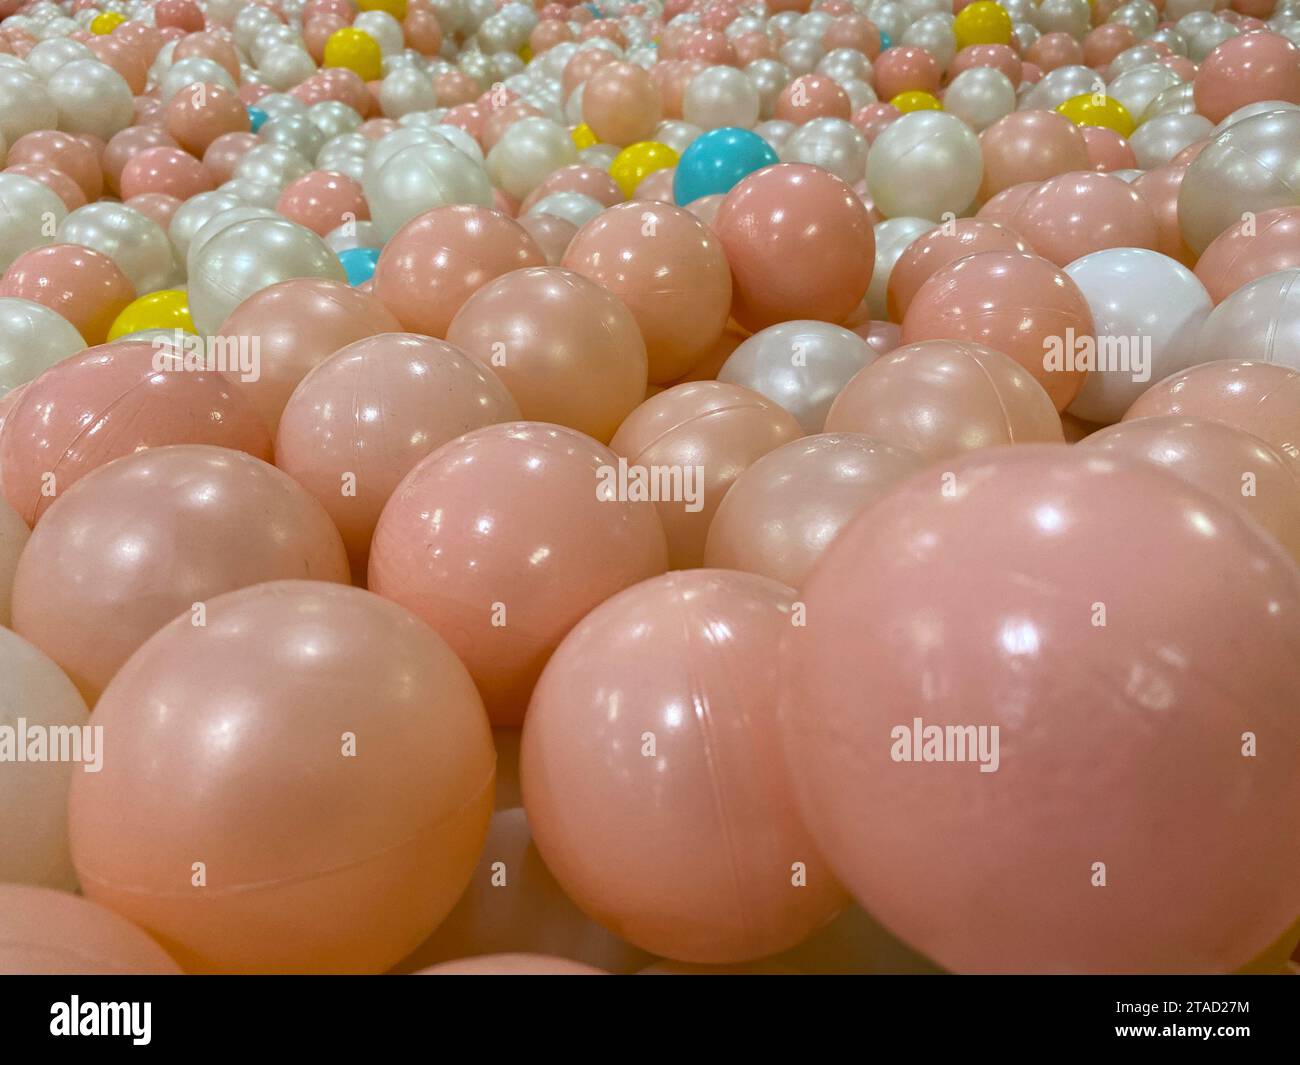 Many colorful plastic balls from above Stock Photo